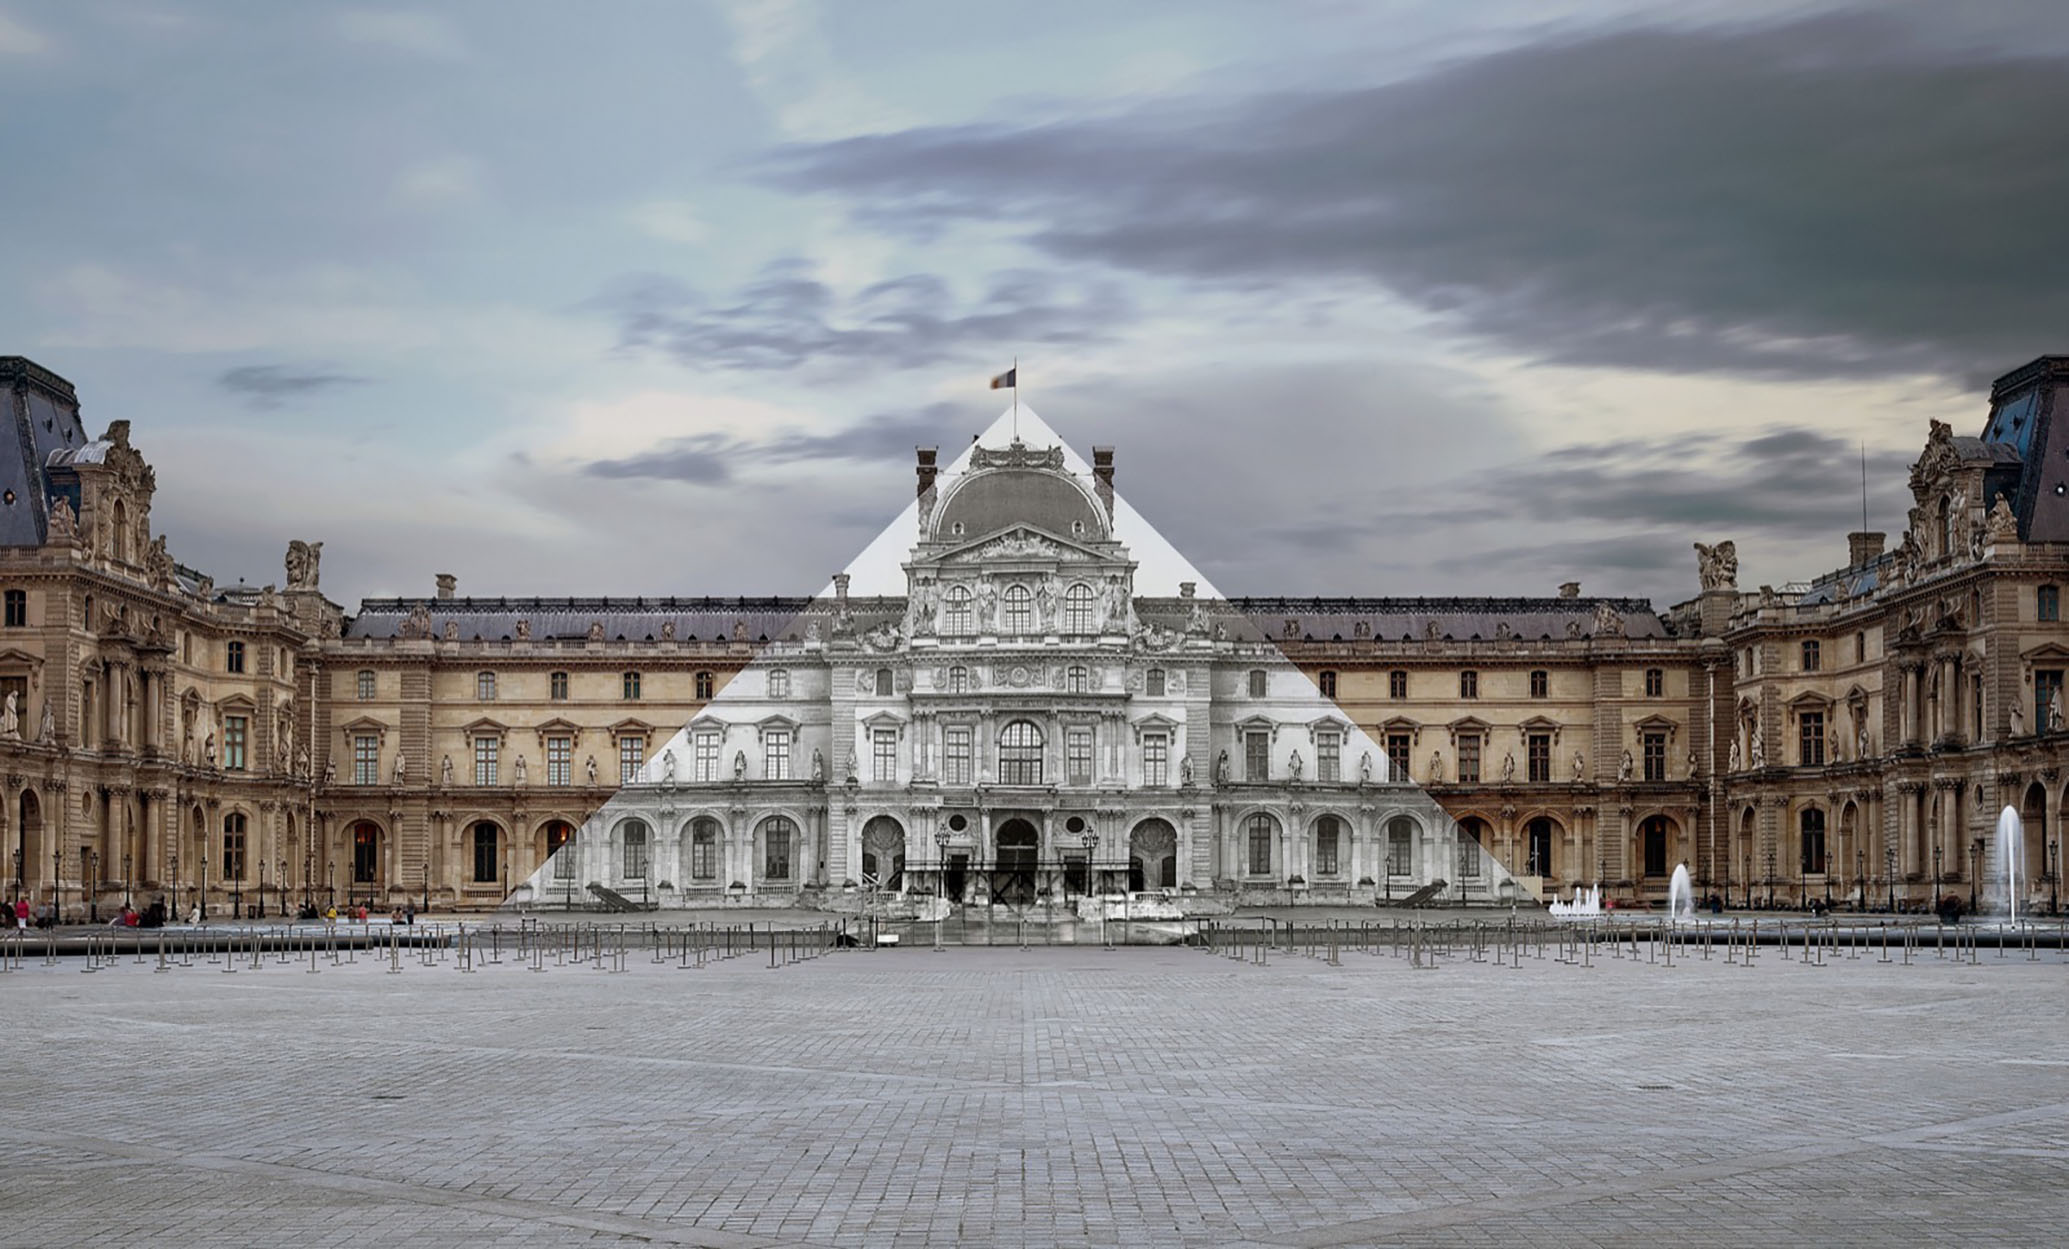 A 2016 installation by French artist JR in which he made the Louvre pyramid "disappear." 